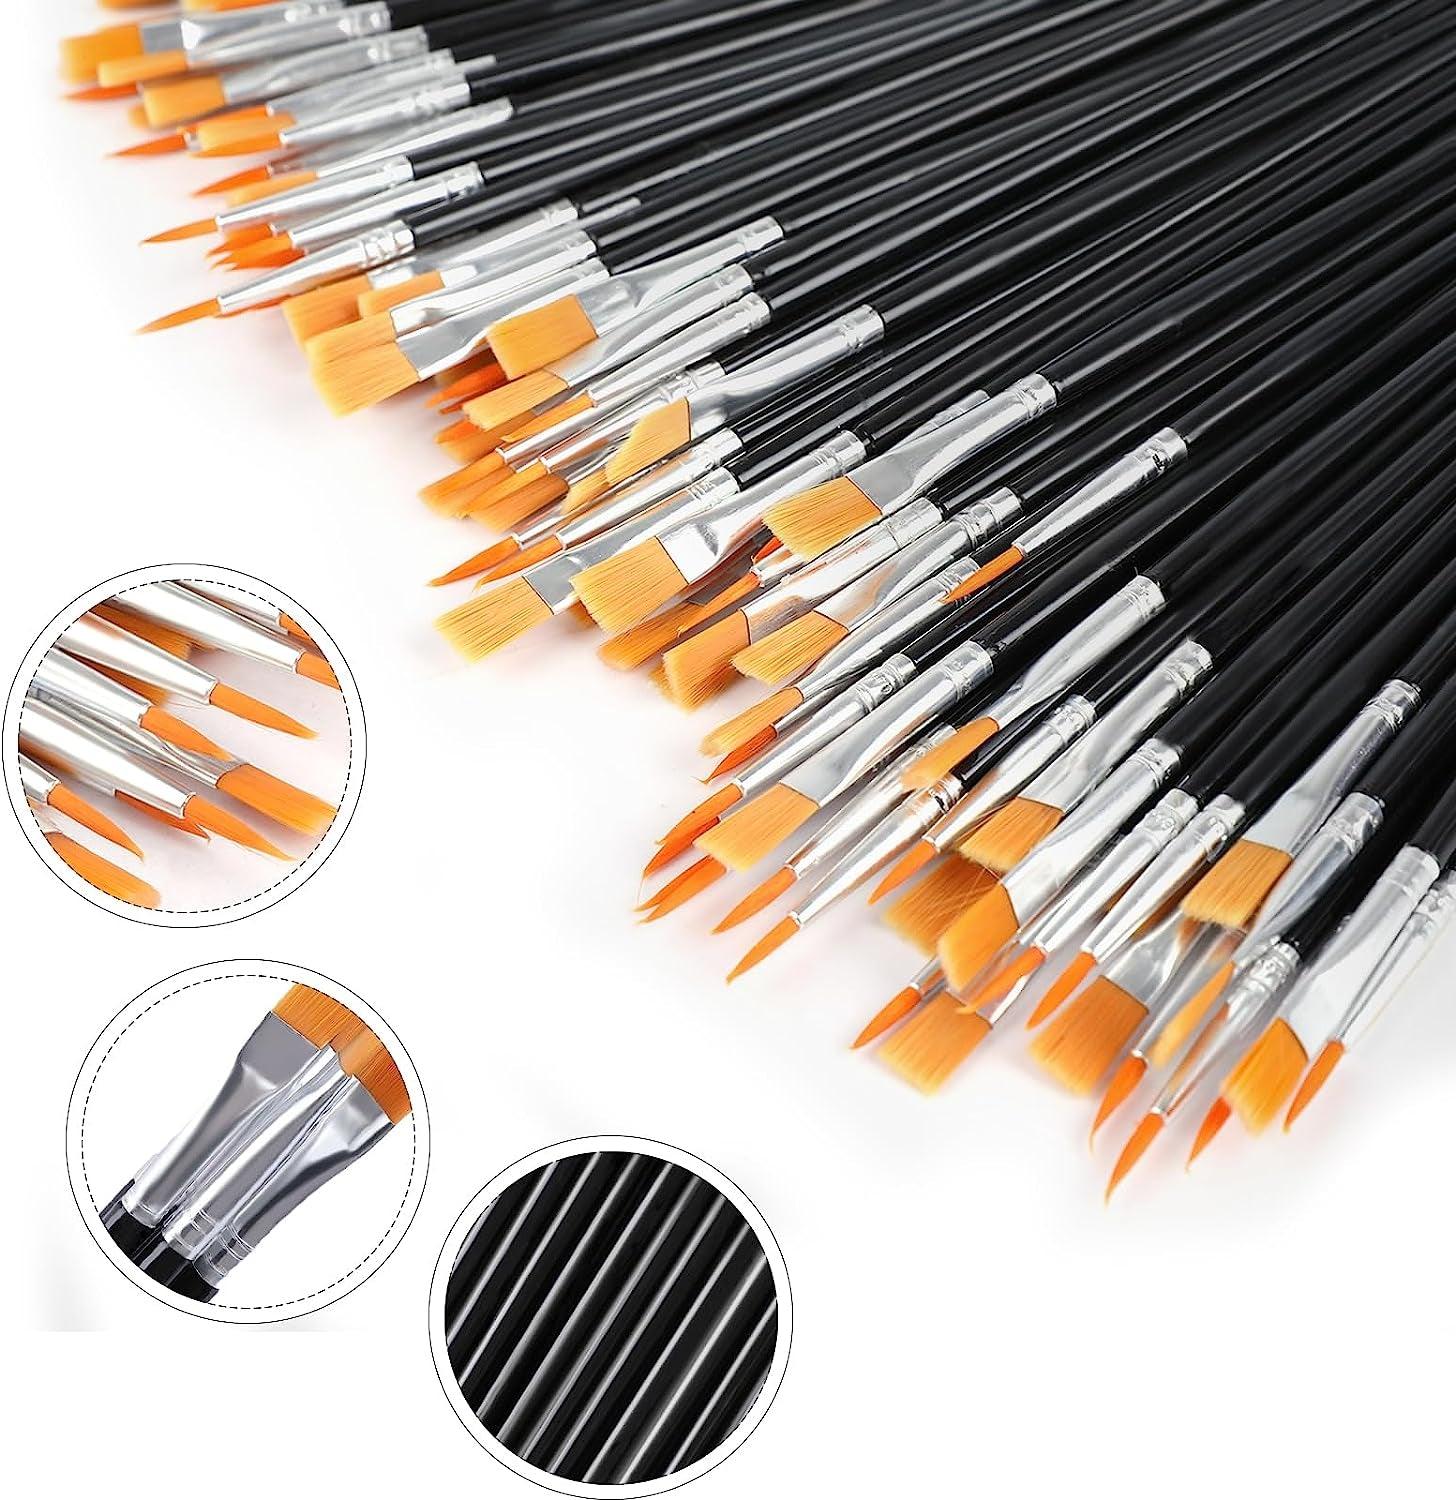 Paint Brushes Set,110 pcs Nylon Hair Brushes for Acrylic Oil Watercolor  Artist Professional Painting Kits